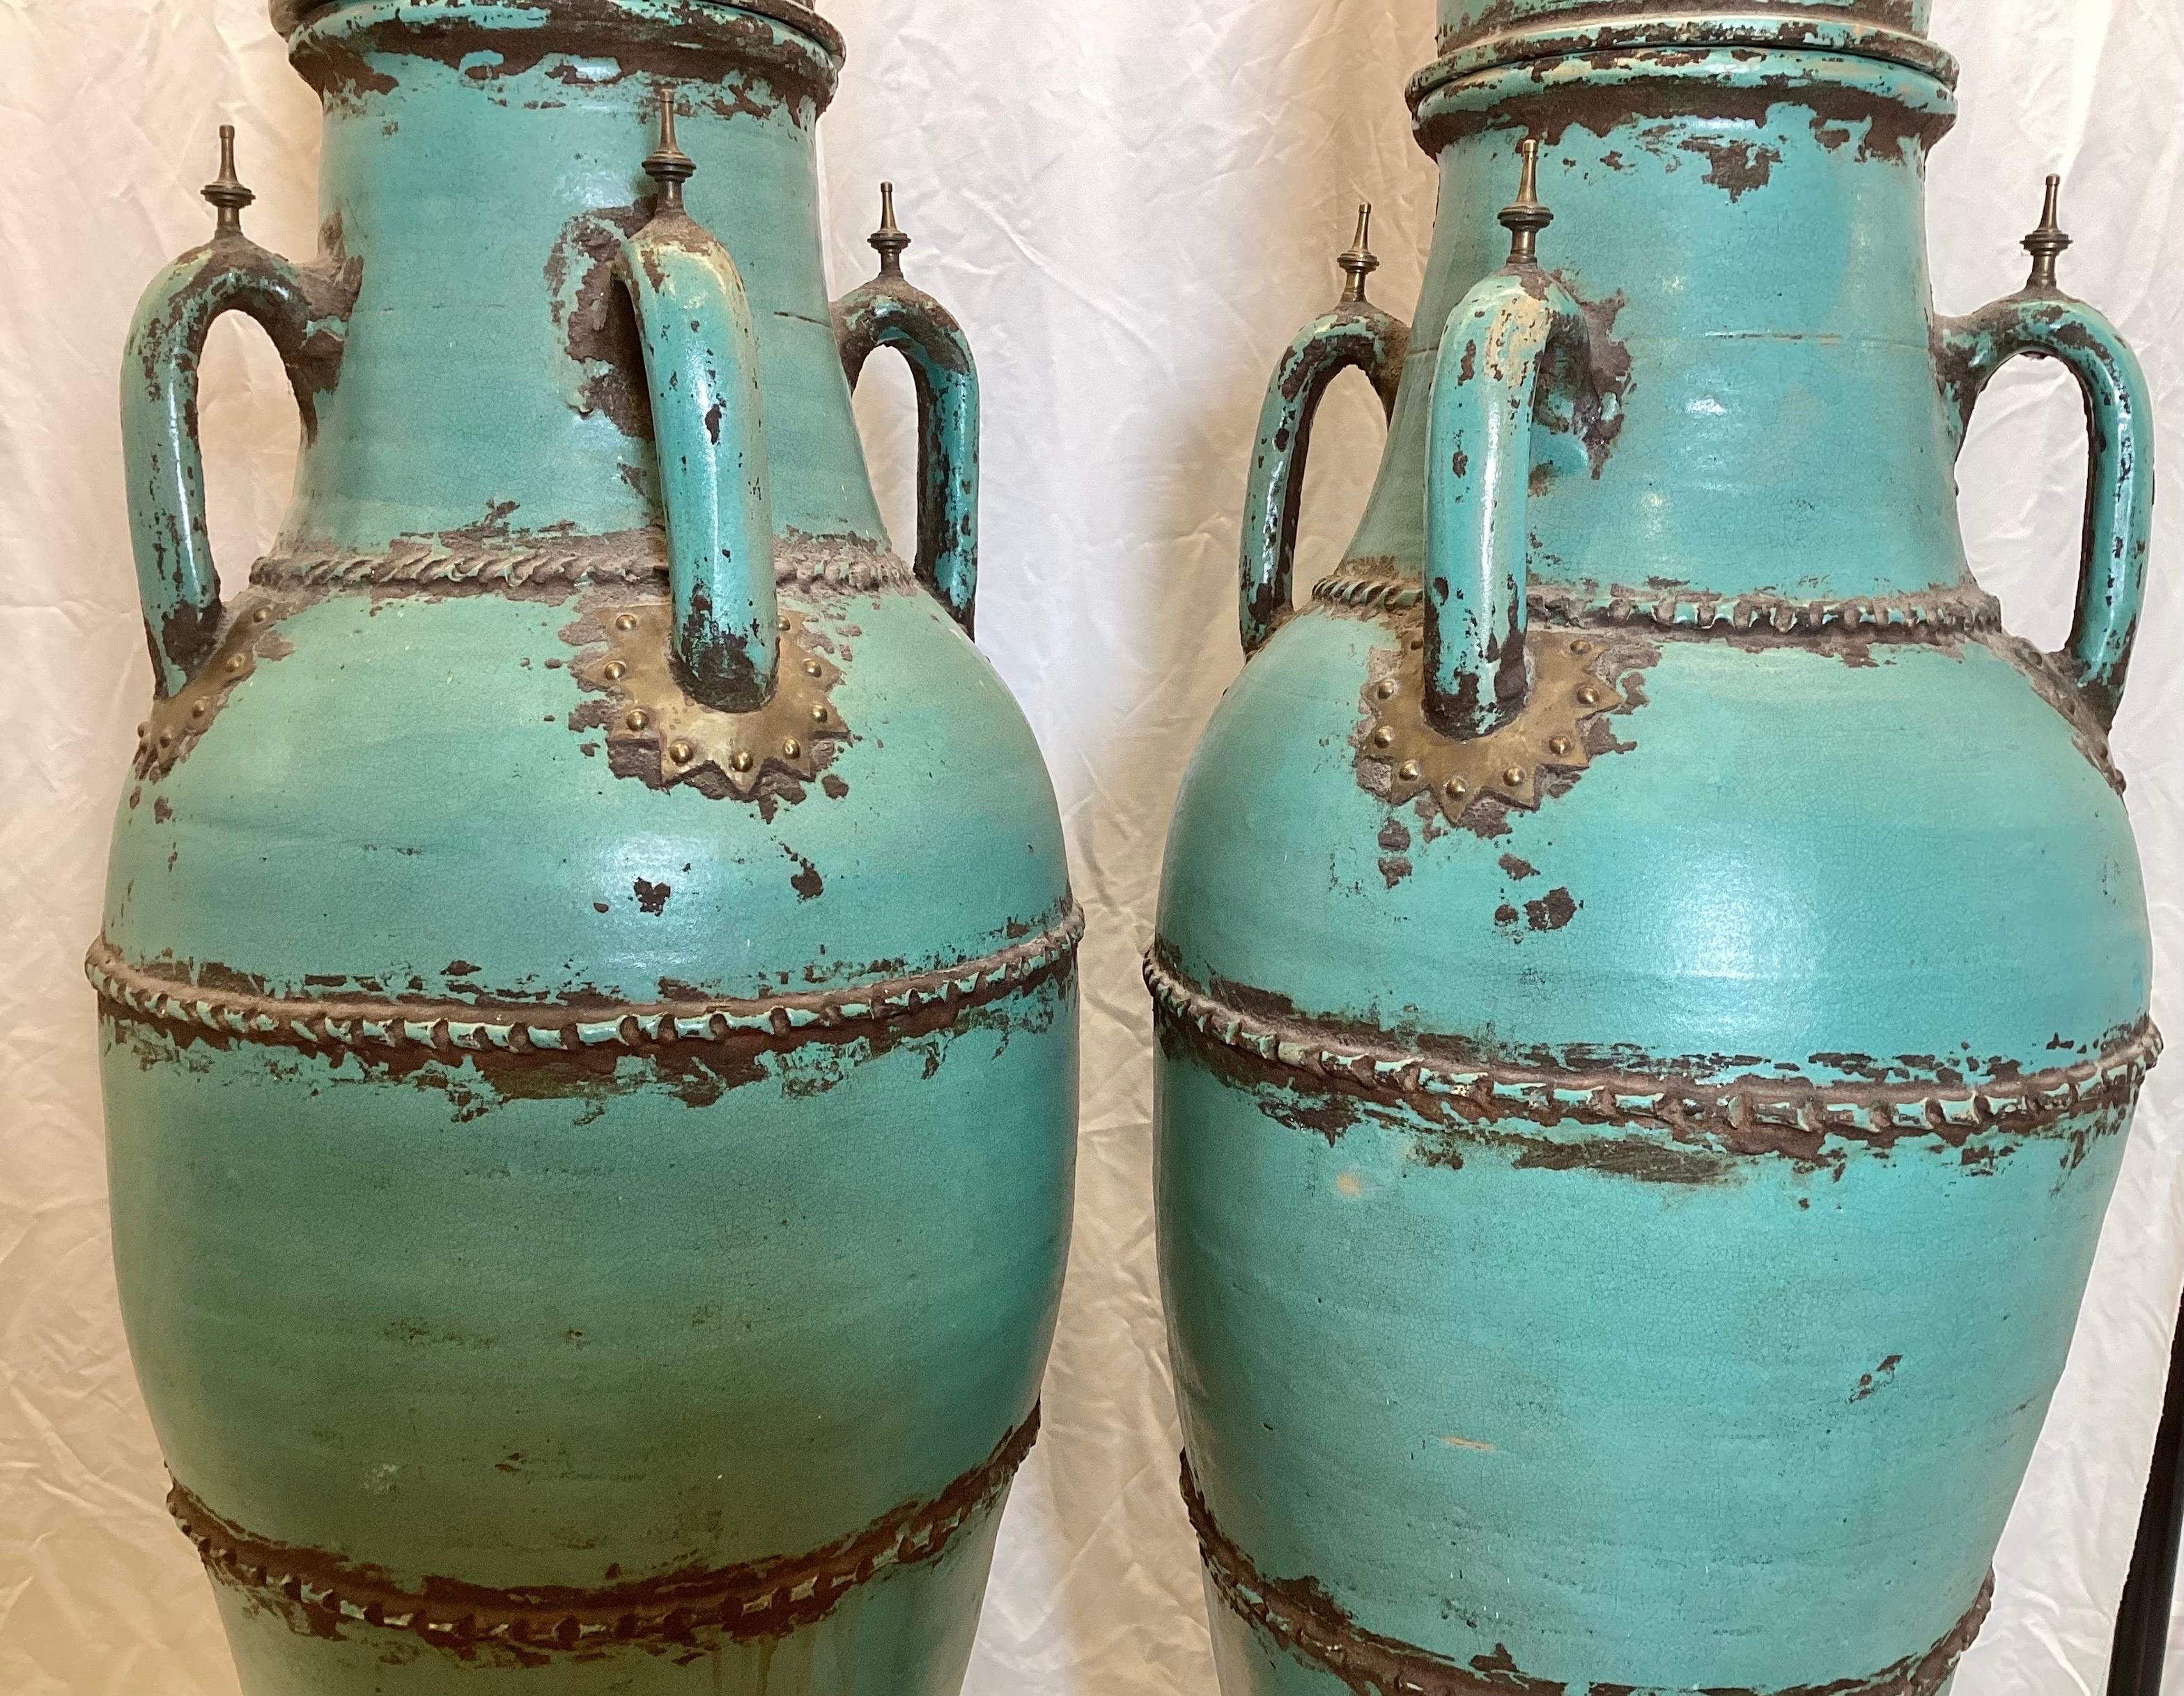 Glazed A Pair of Monumental Four Handled Tall Pottery Urns For Sale